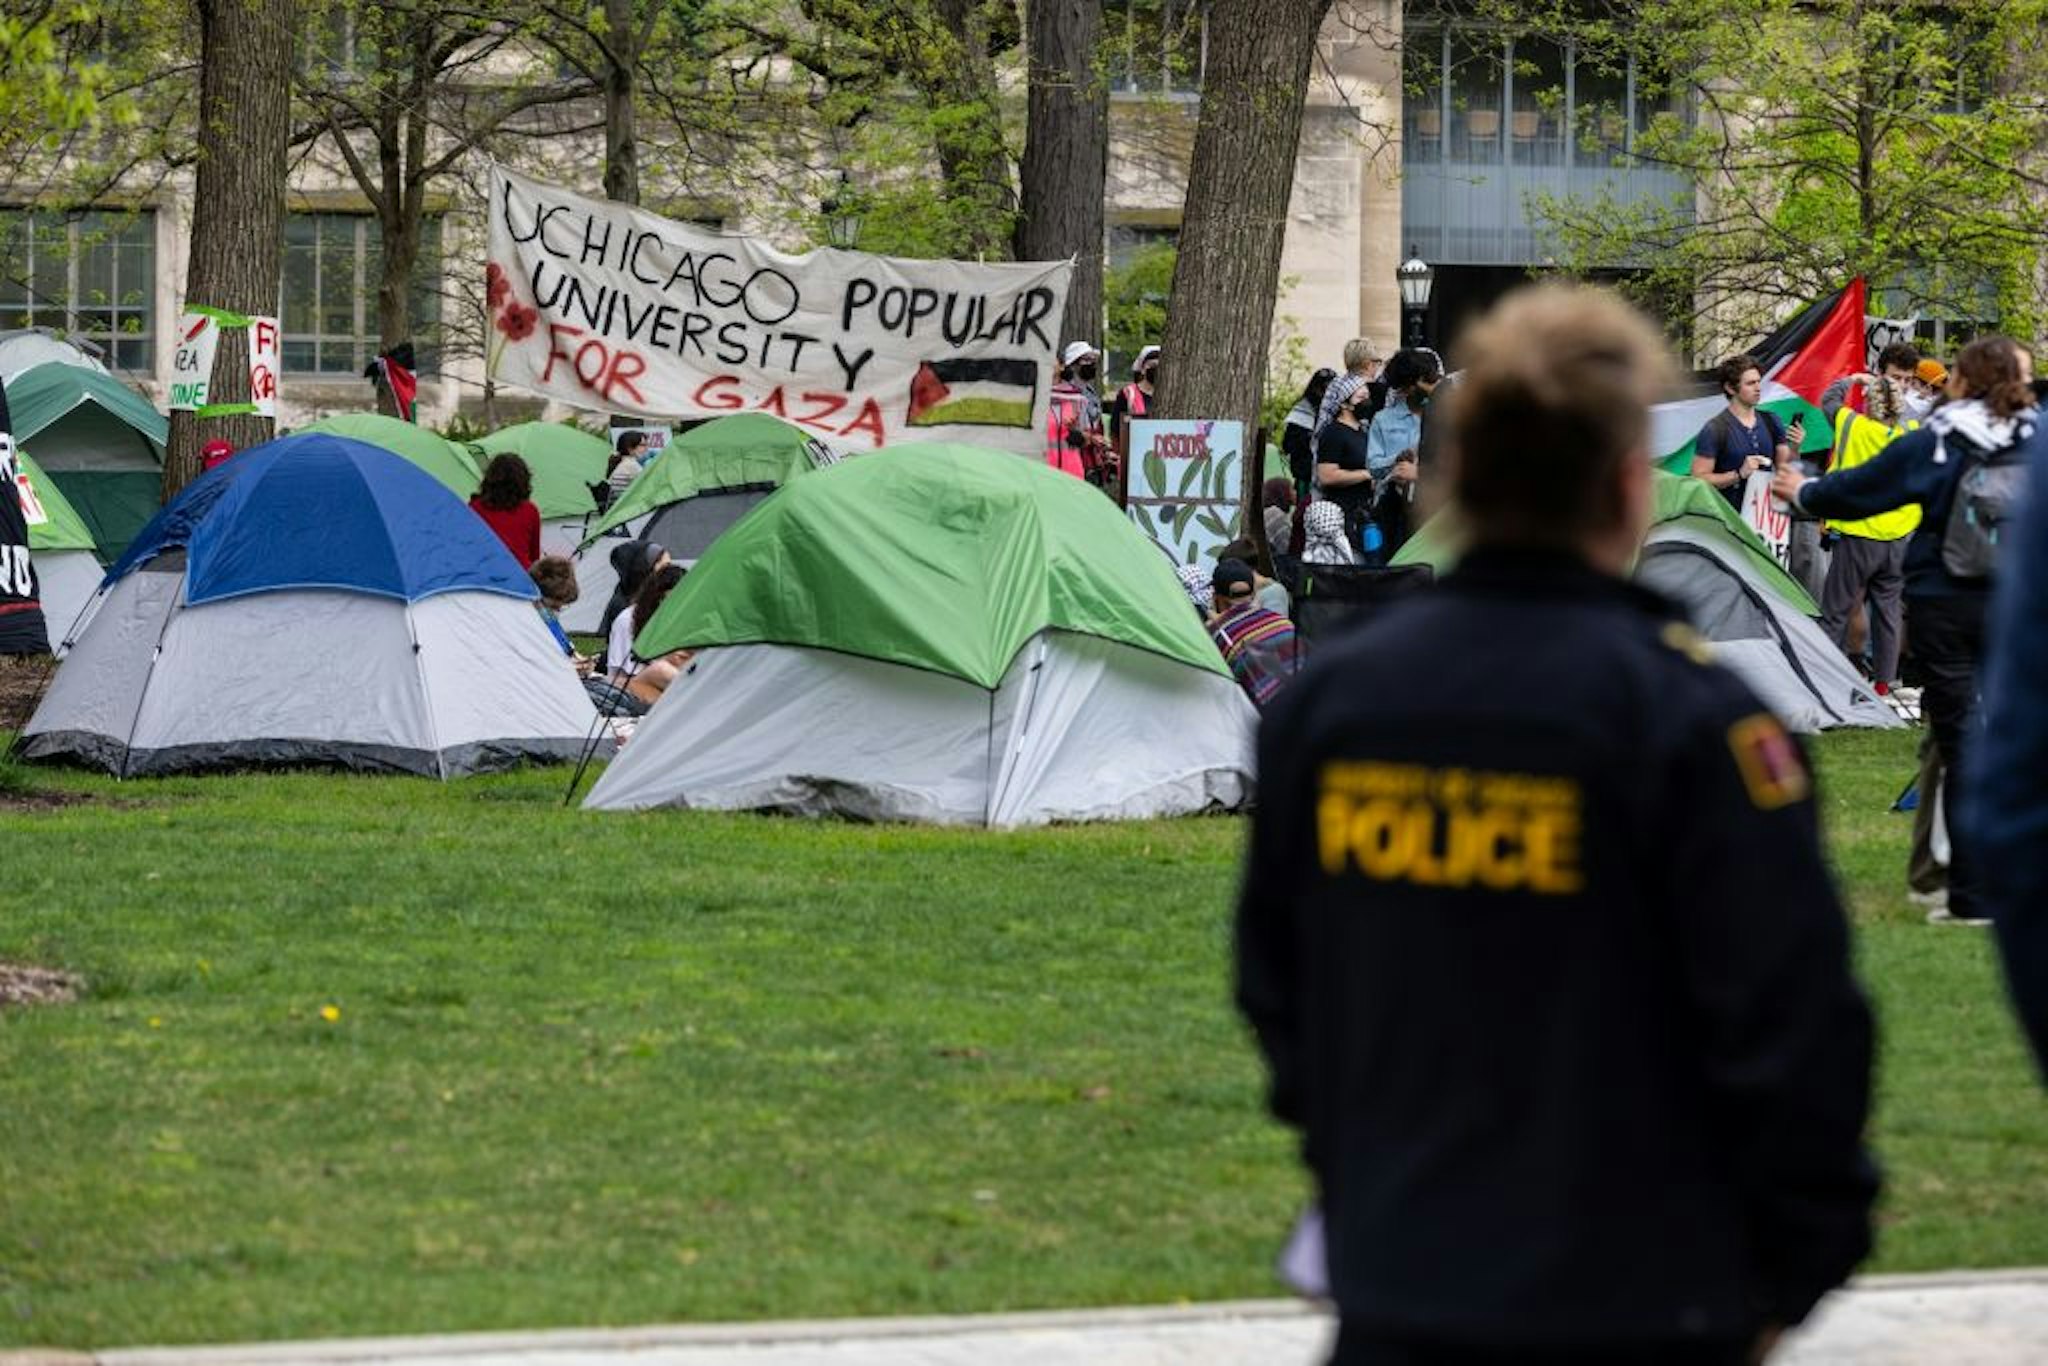 A police officer stands beside a pro-Palestine encampment on campus of the University of Chicago UChicago in Chicago, the United States, on April 29, 2024. Hundreds of UChicago students set up an encampment in the center of the campus on Monday, joining groups on over 100 university campuses across the United States in support of Palestinians.